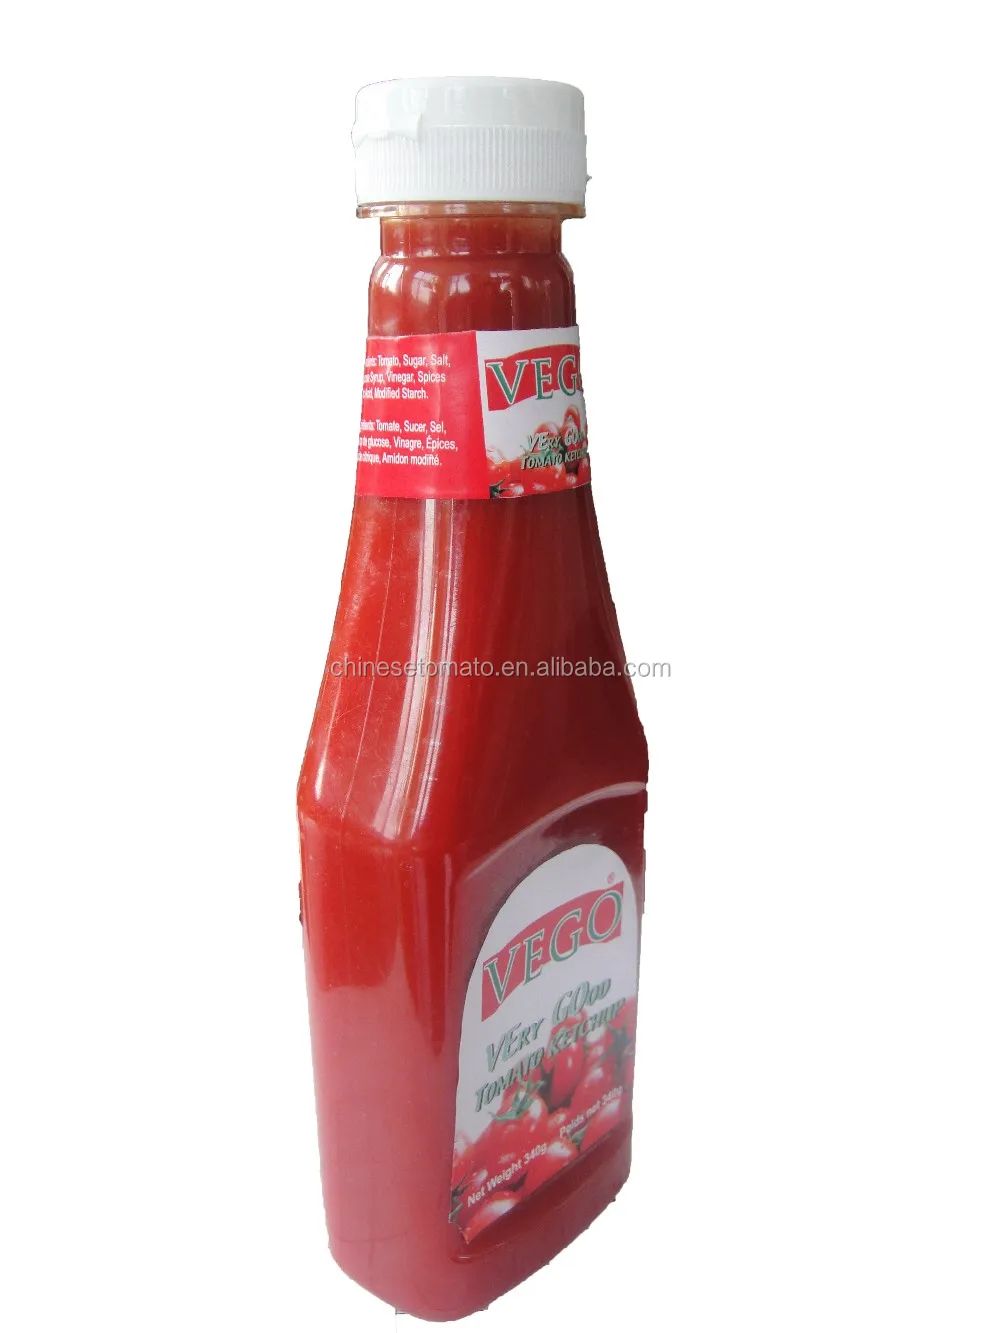 Bottle Tomato Ketchup from China